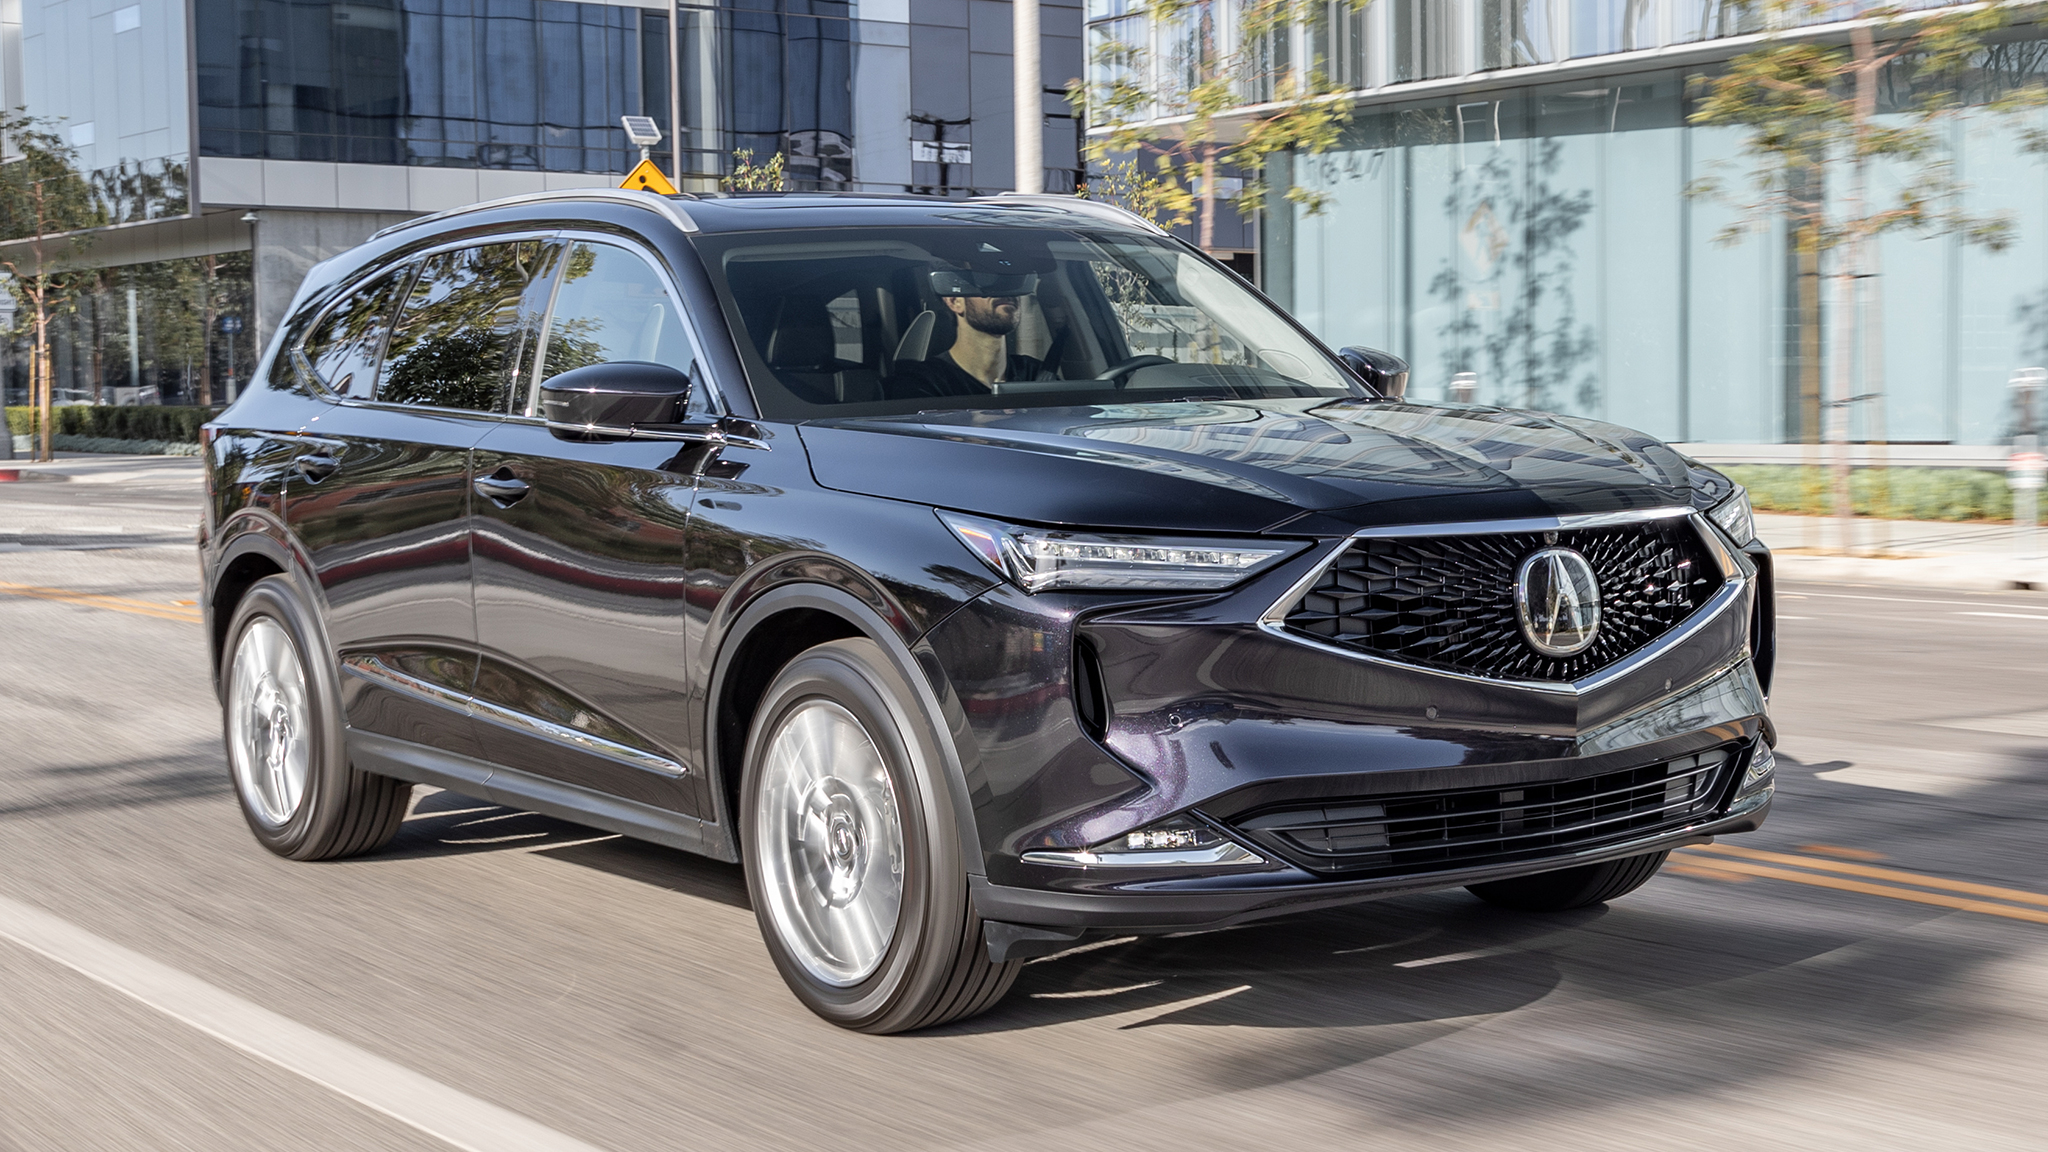 The 2022 Acura MDX driving through a city